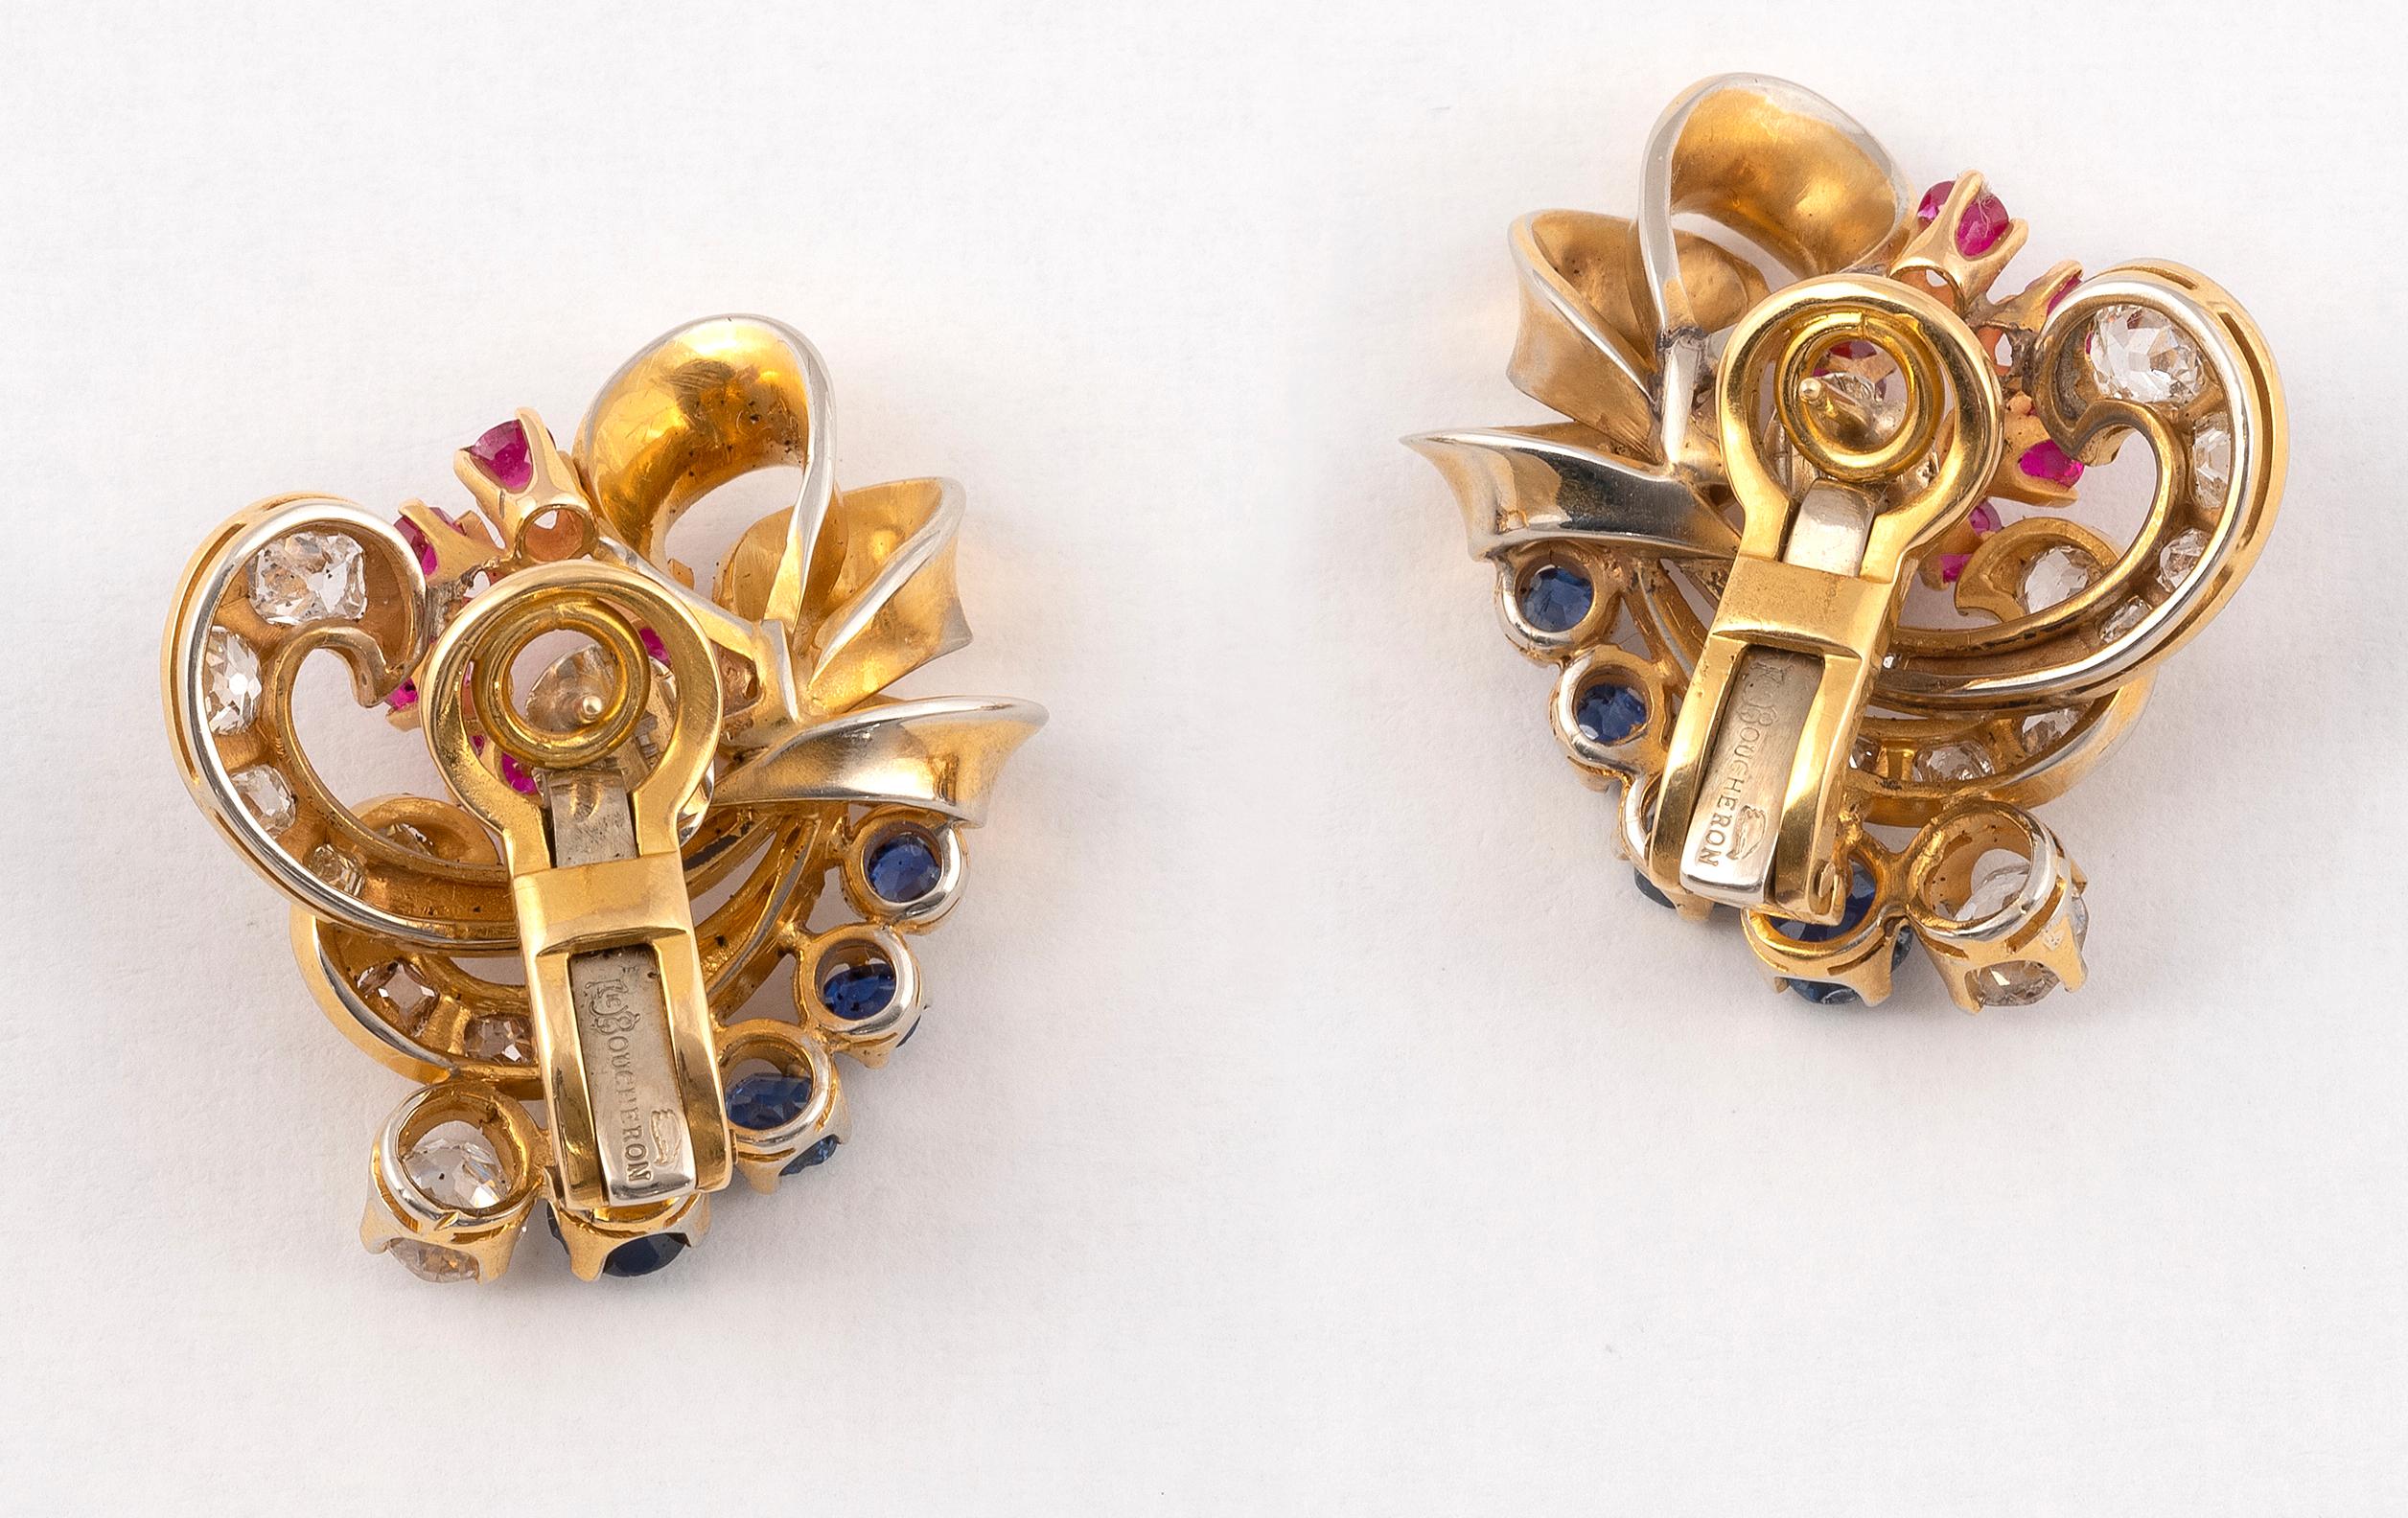 Brilliant Cut Pair of Diamond Ruby and Sapphire Earclips by Boucheron, Circa 1960